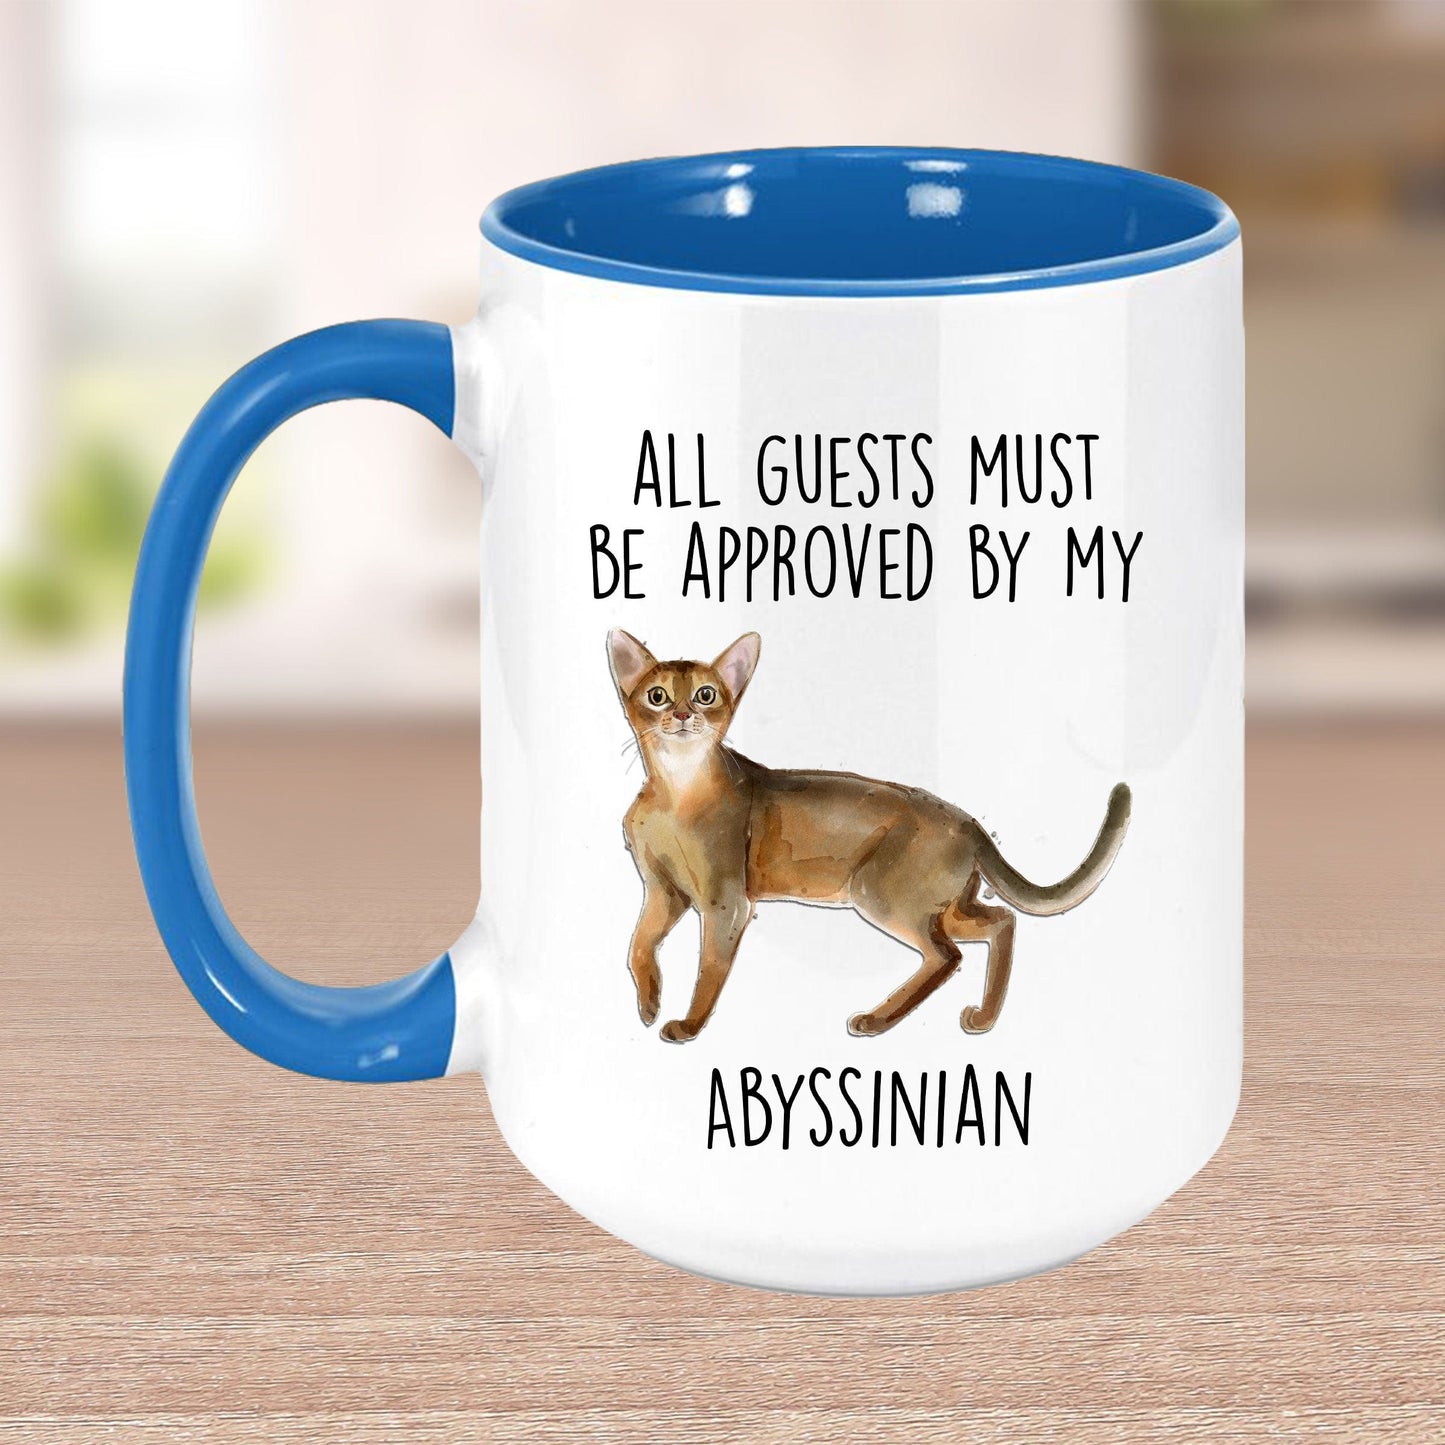 Abyssinian Cat Funny Coffee Mug - All Guests Must Be Approved